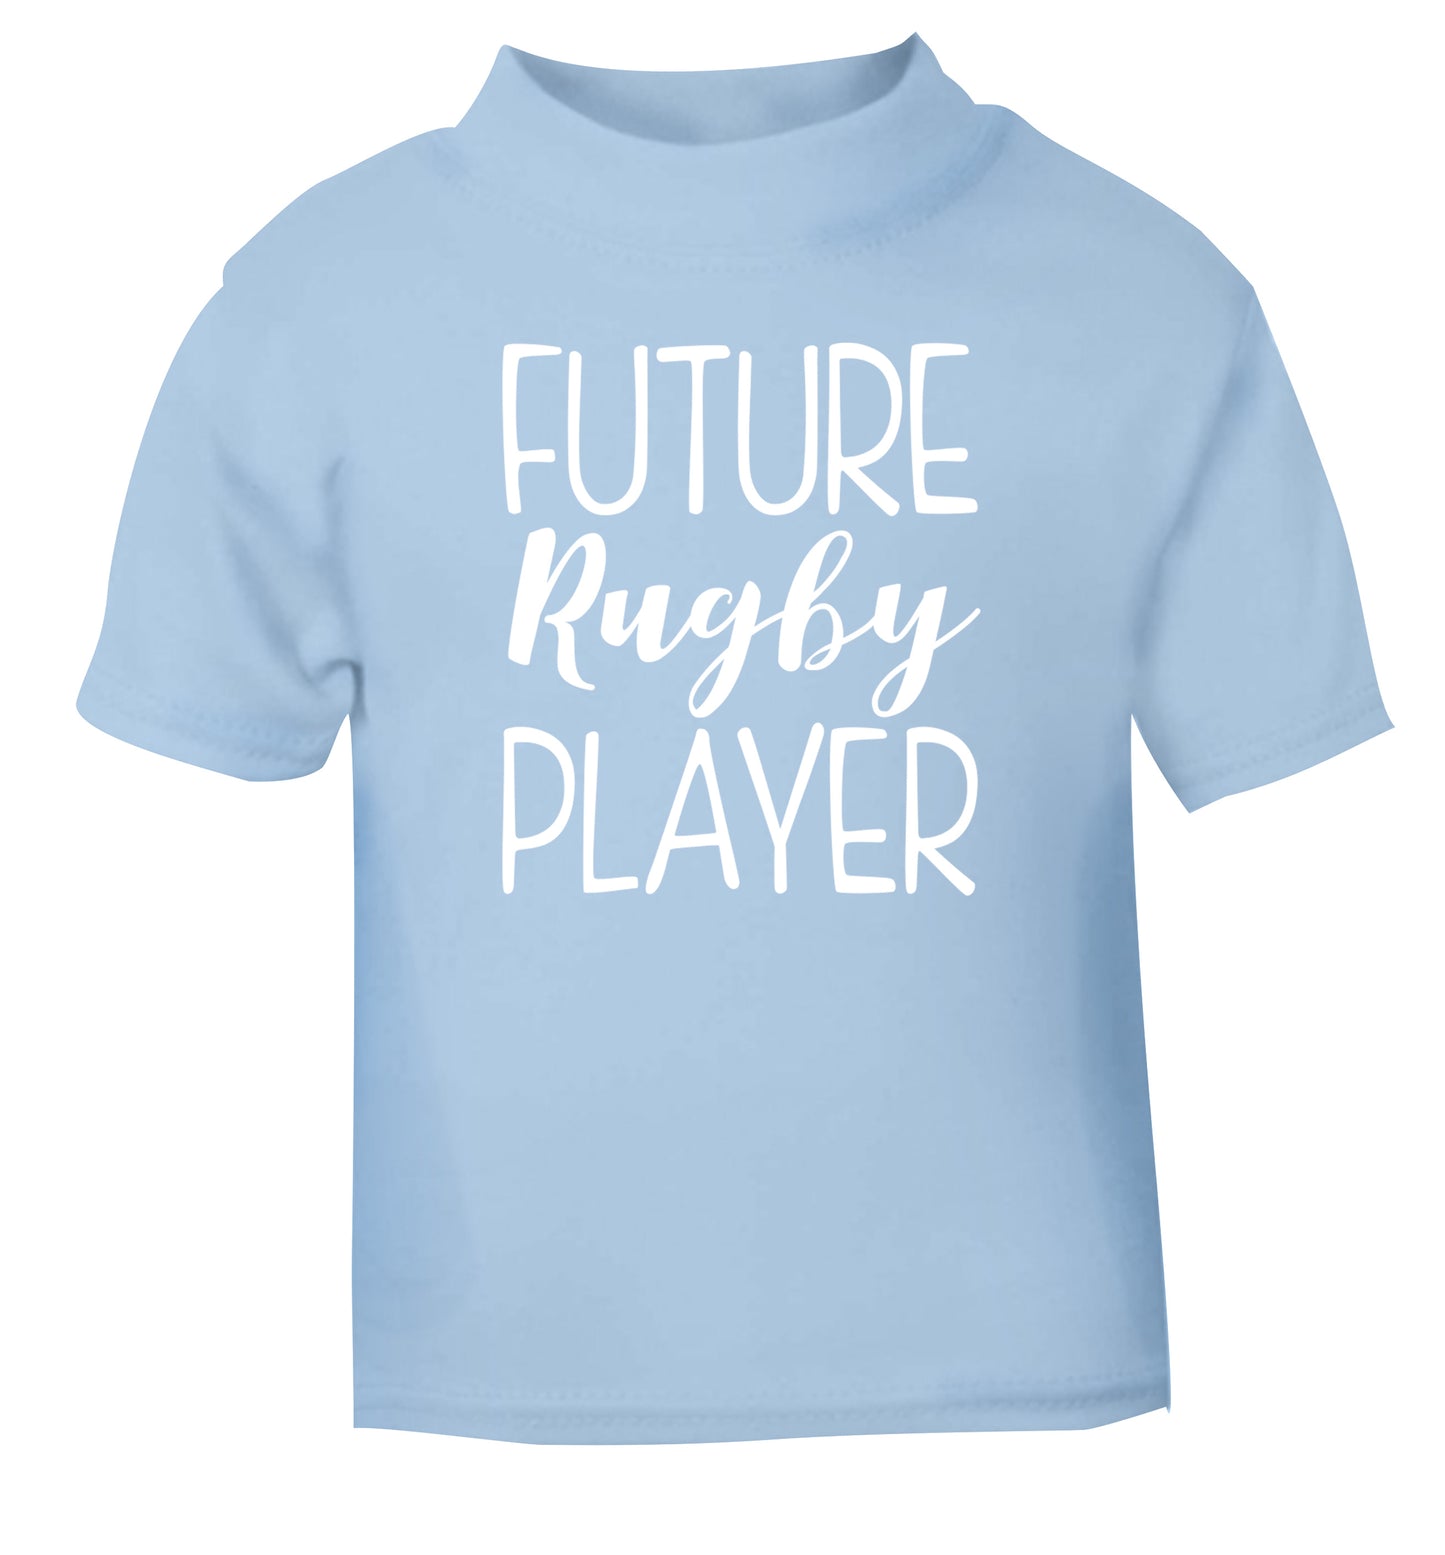 Future rugby player light blue Baby Toddler Tshirt 2 Years